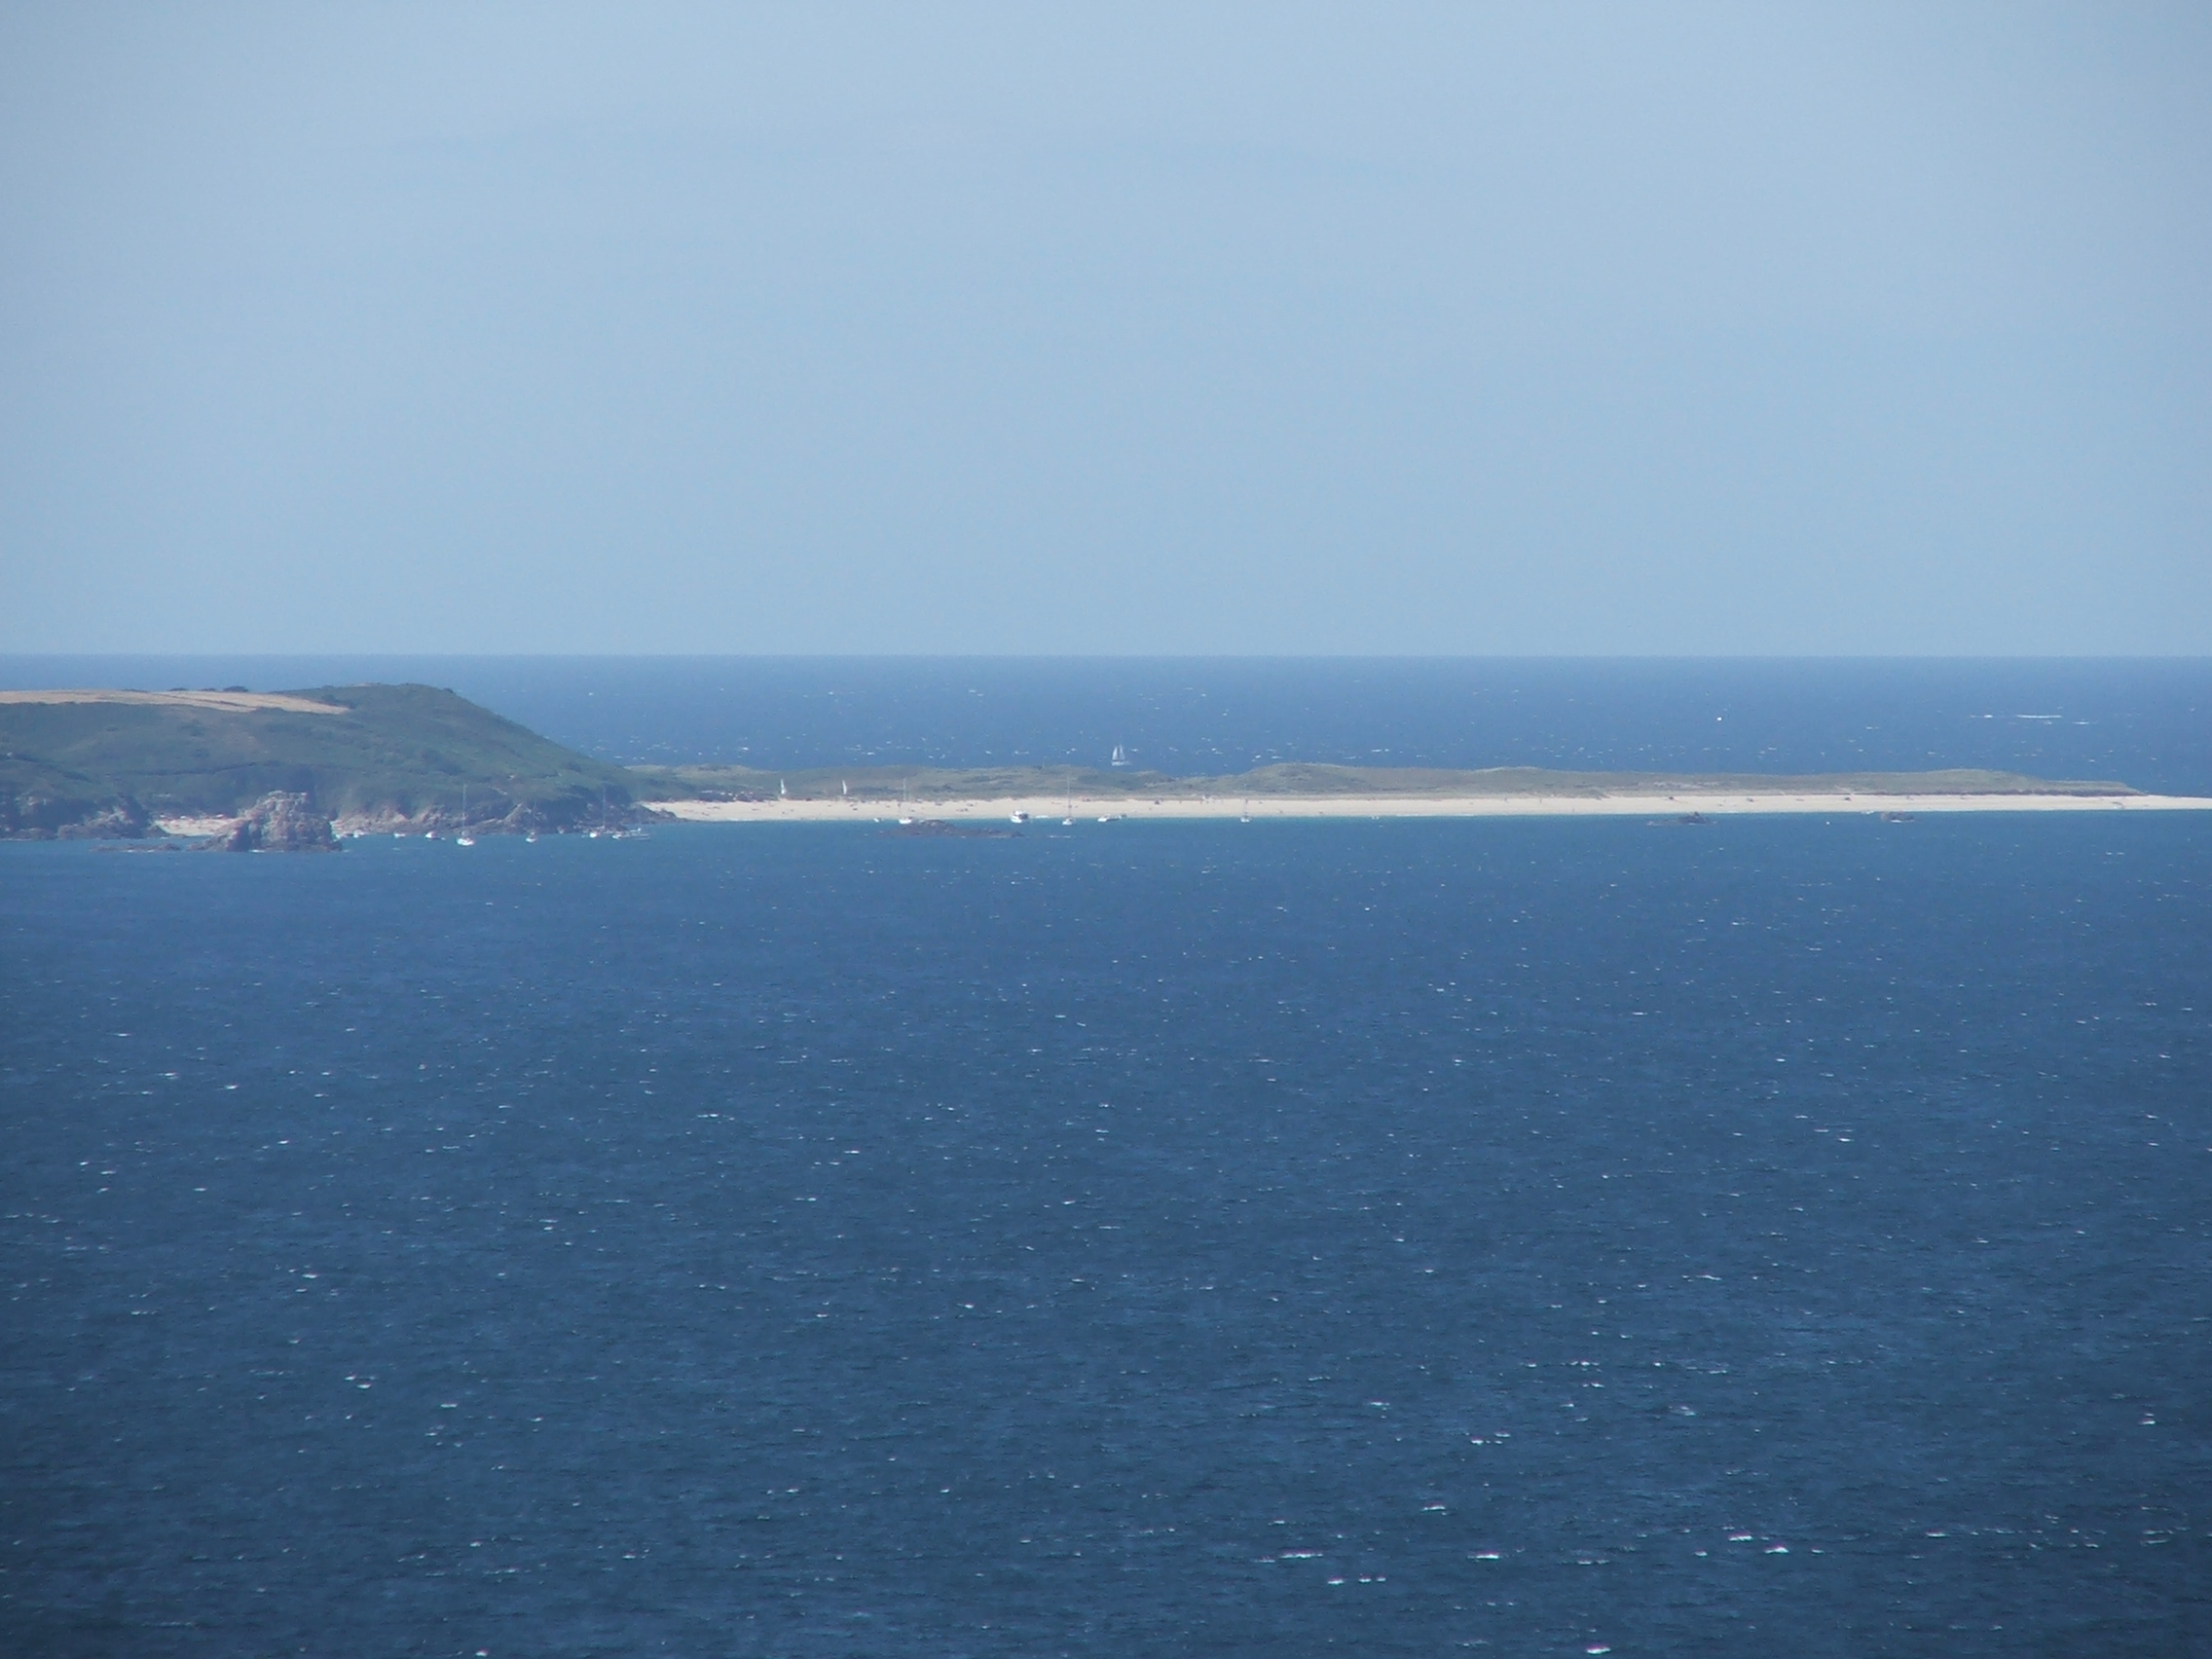 Sark, viewed from Herm